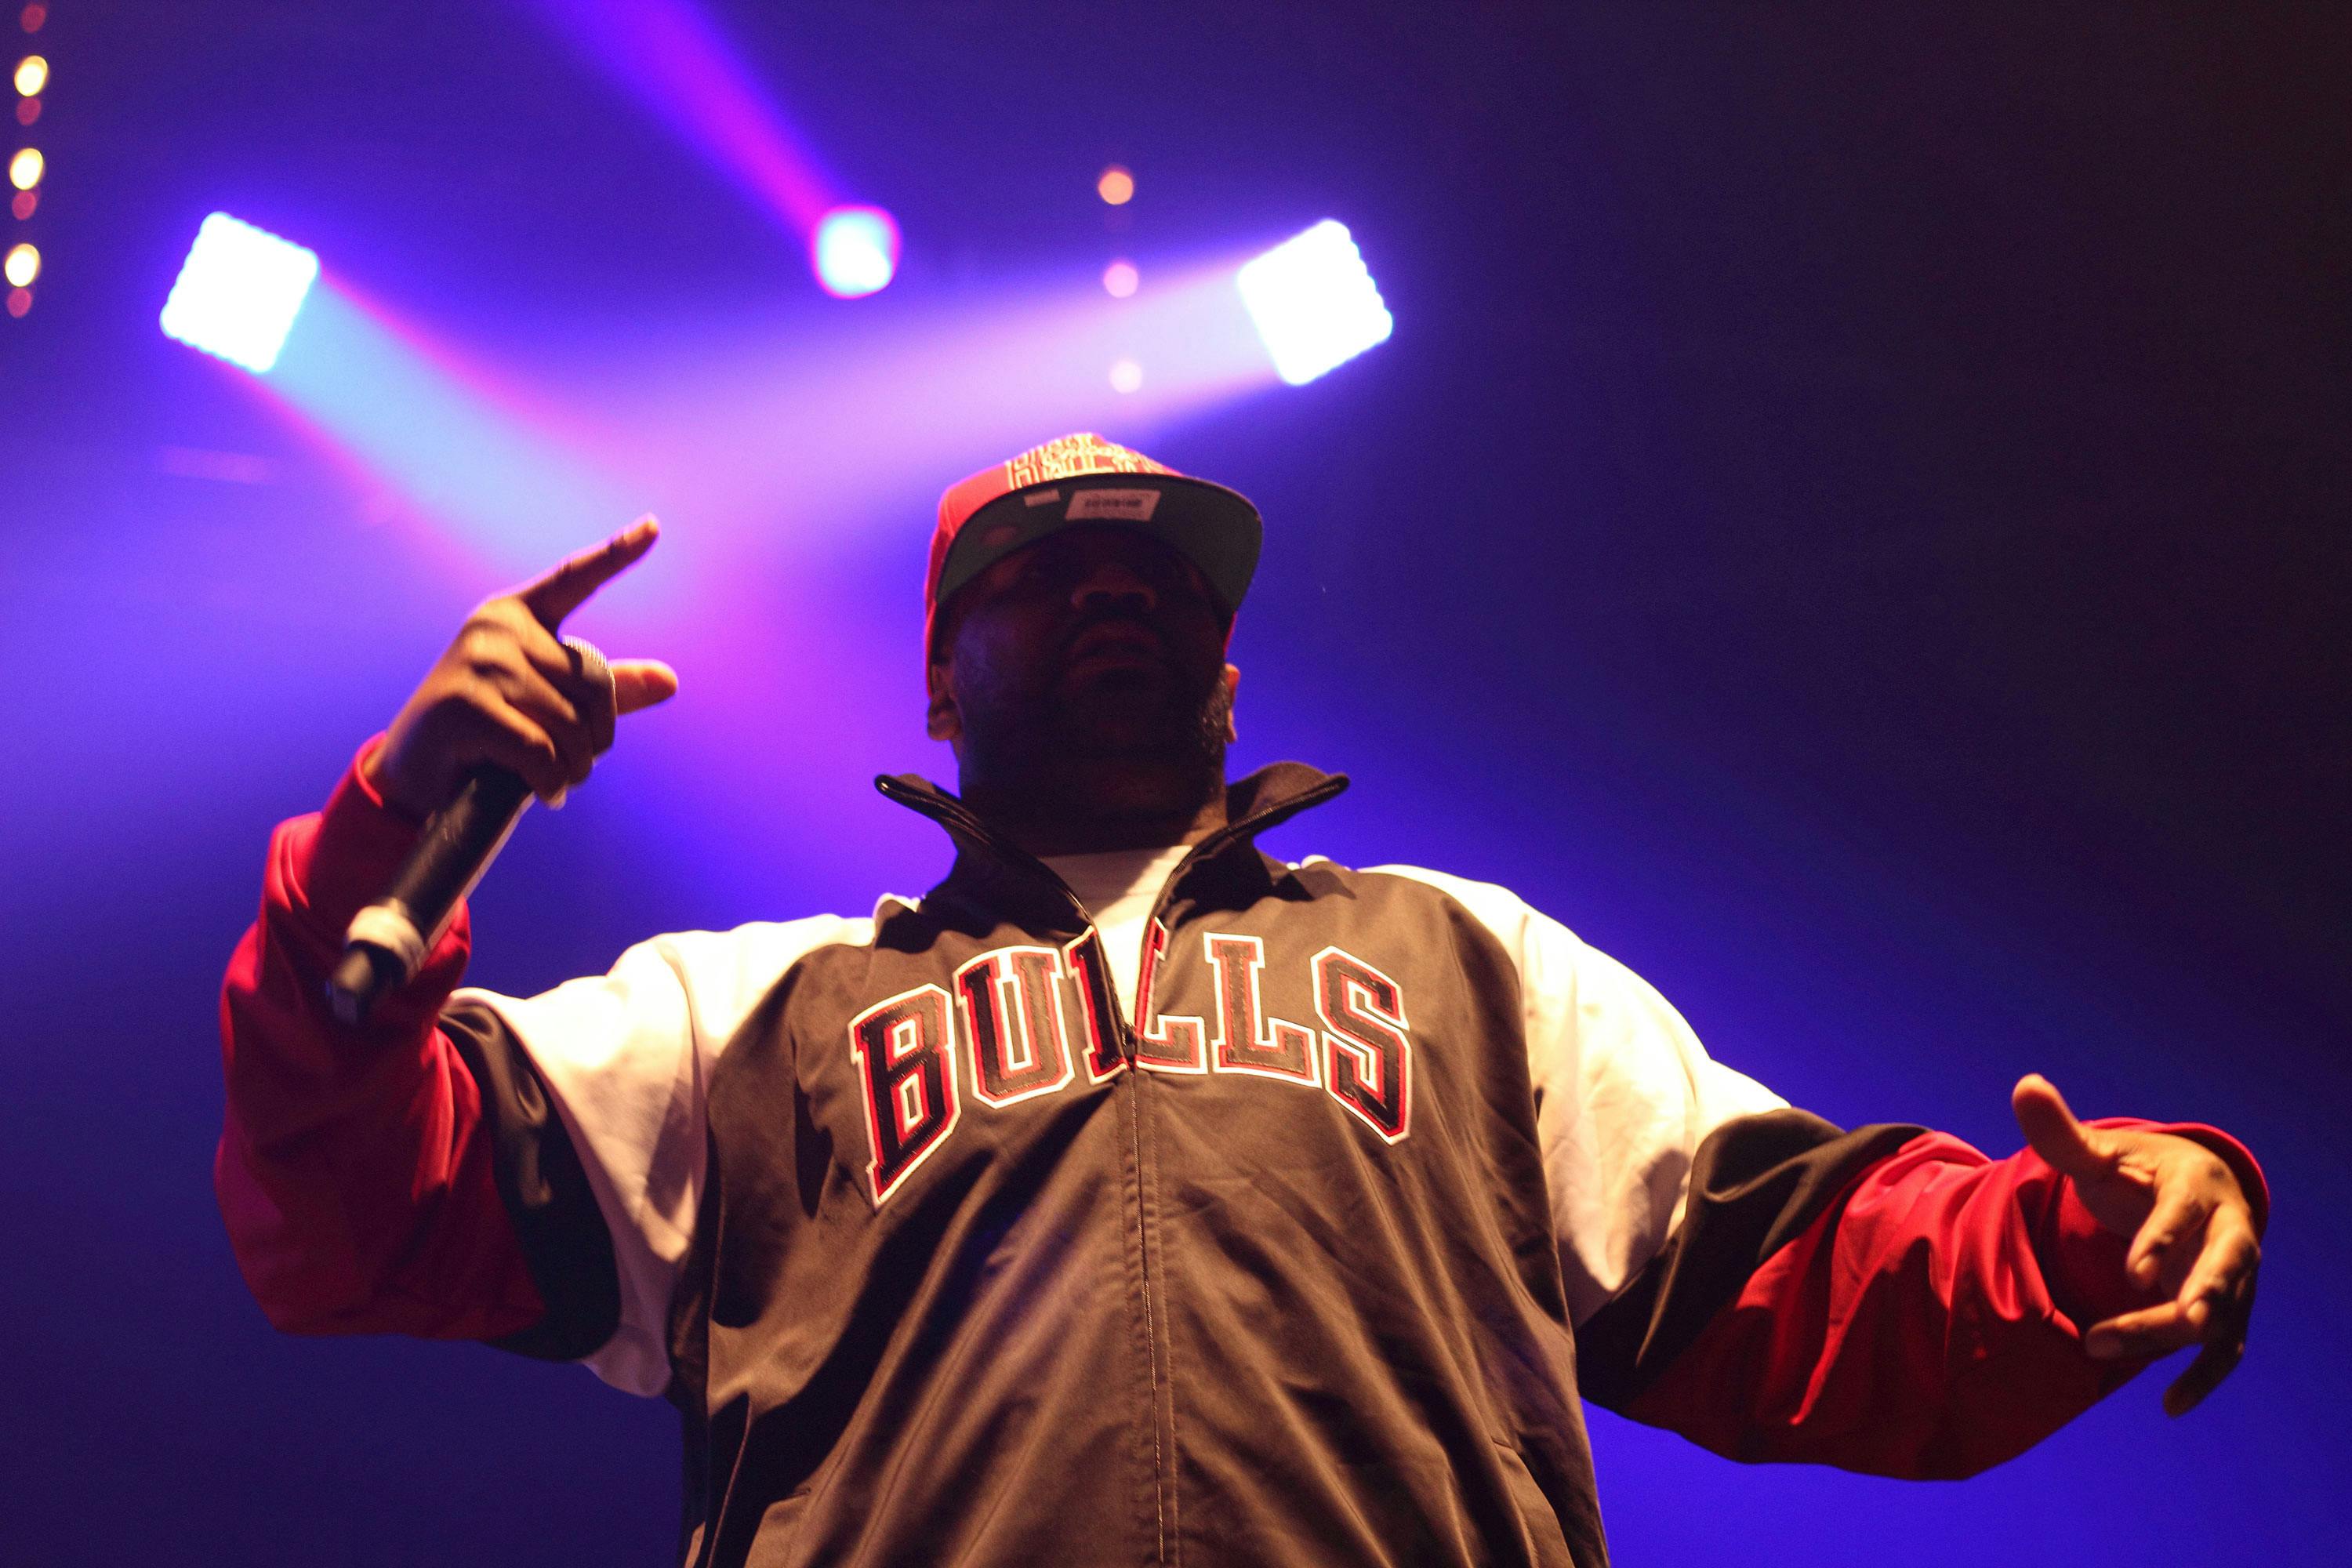 Ghostface Killah (Wu-Tang Clan) performing in Zénith, Paris on May 23, 2013. Wu-Tang Clan performed for free in Toronto on Saturday in partnership with a cannabis producer, raising questions about canadian cannabis advertising which restricts celebrity endorsements